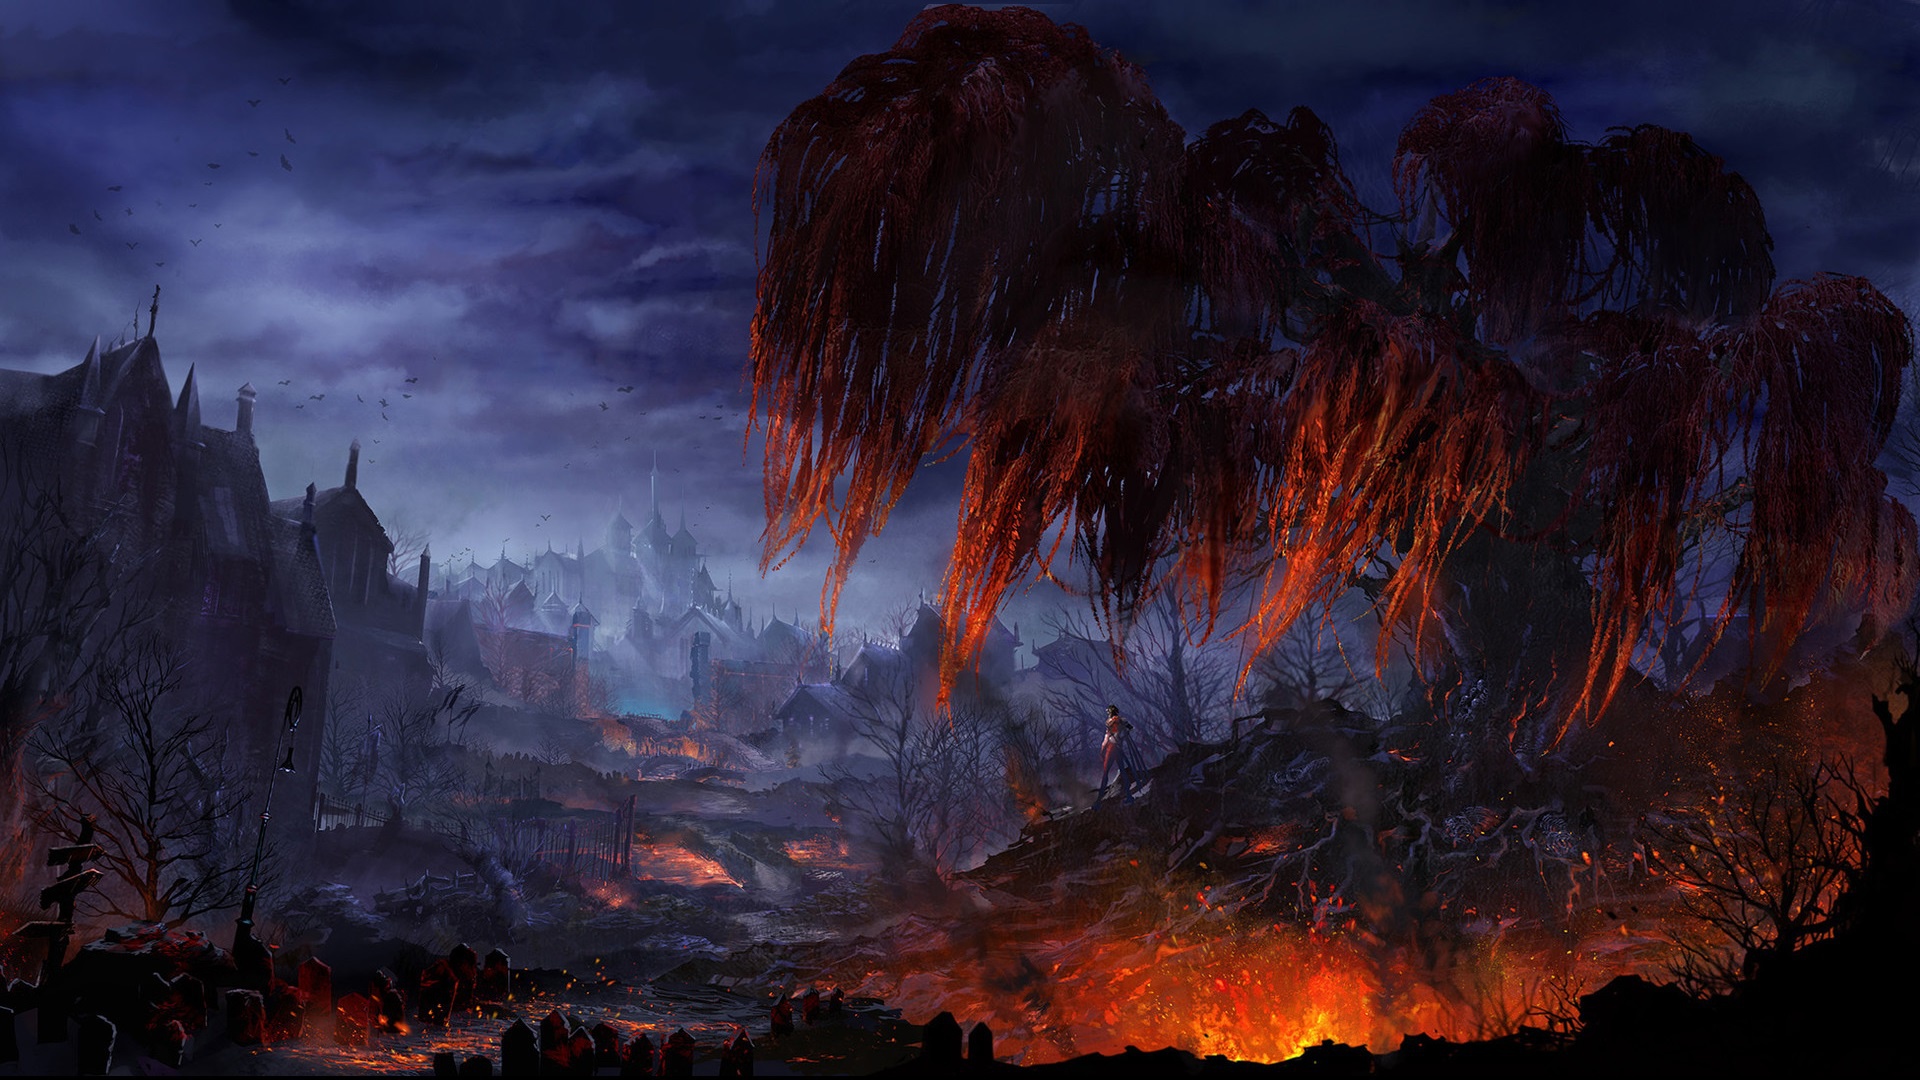 Artwork Fantasy Art Colorful Town Sky Trees Fire Grave 1920x1080